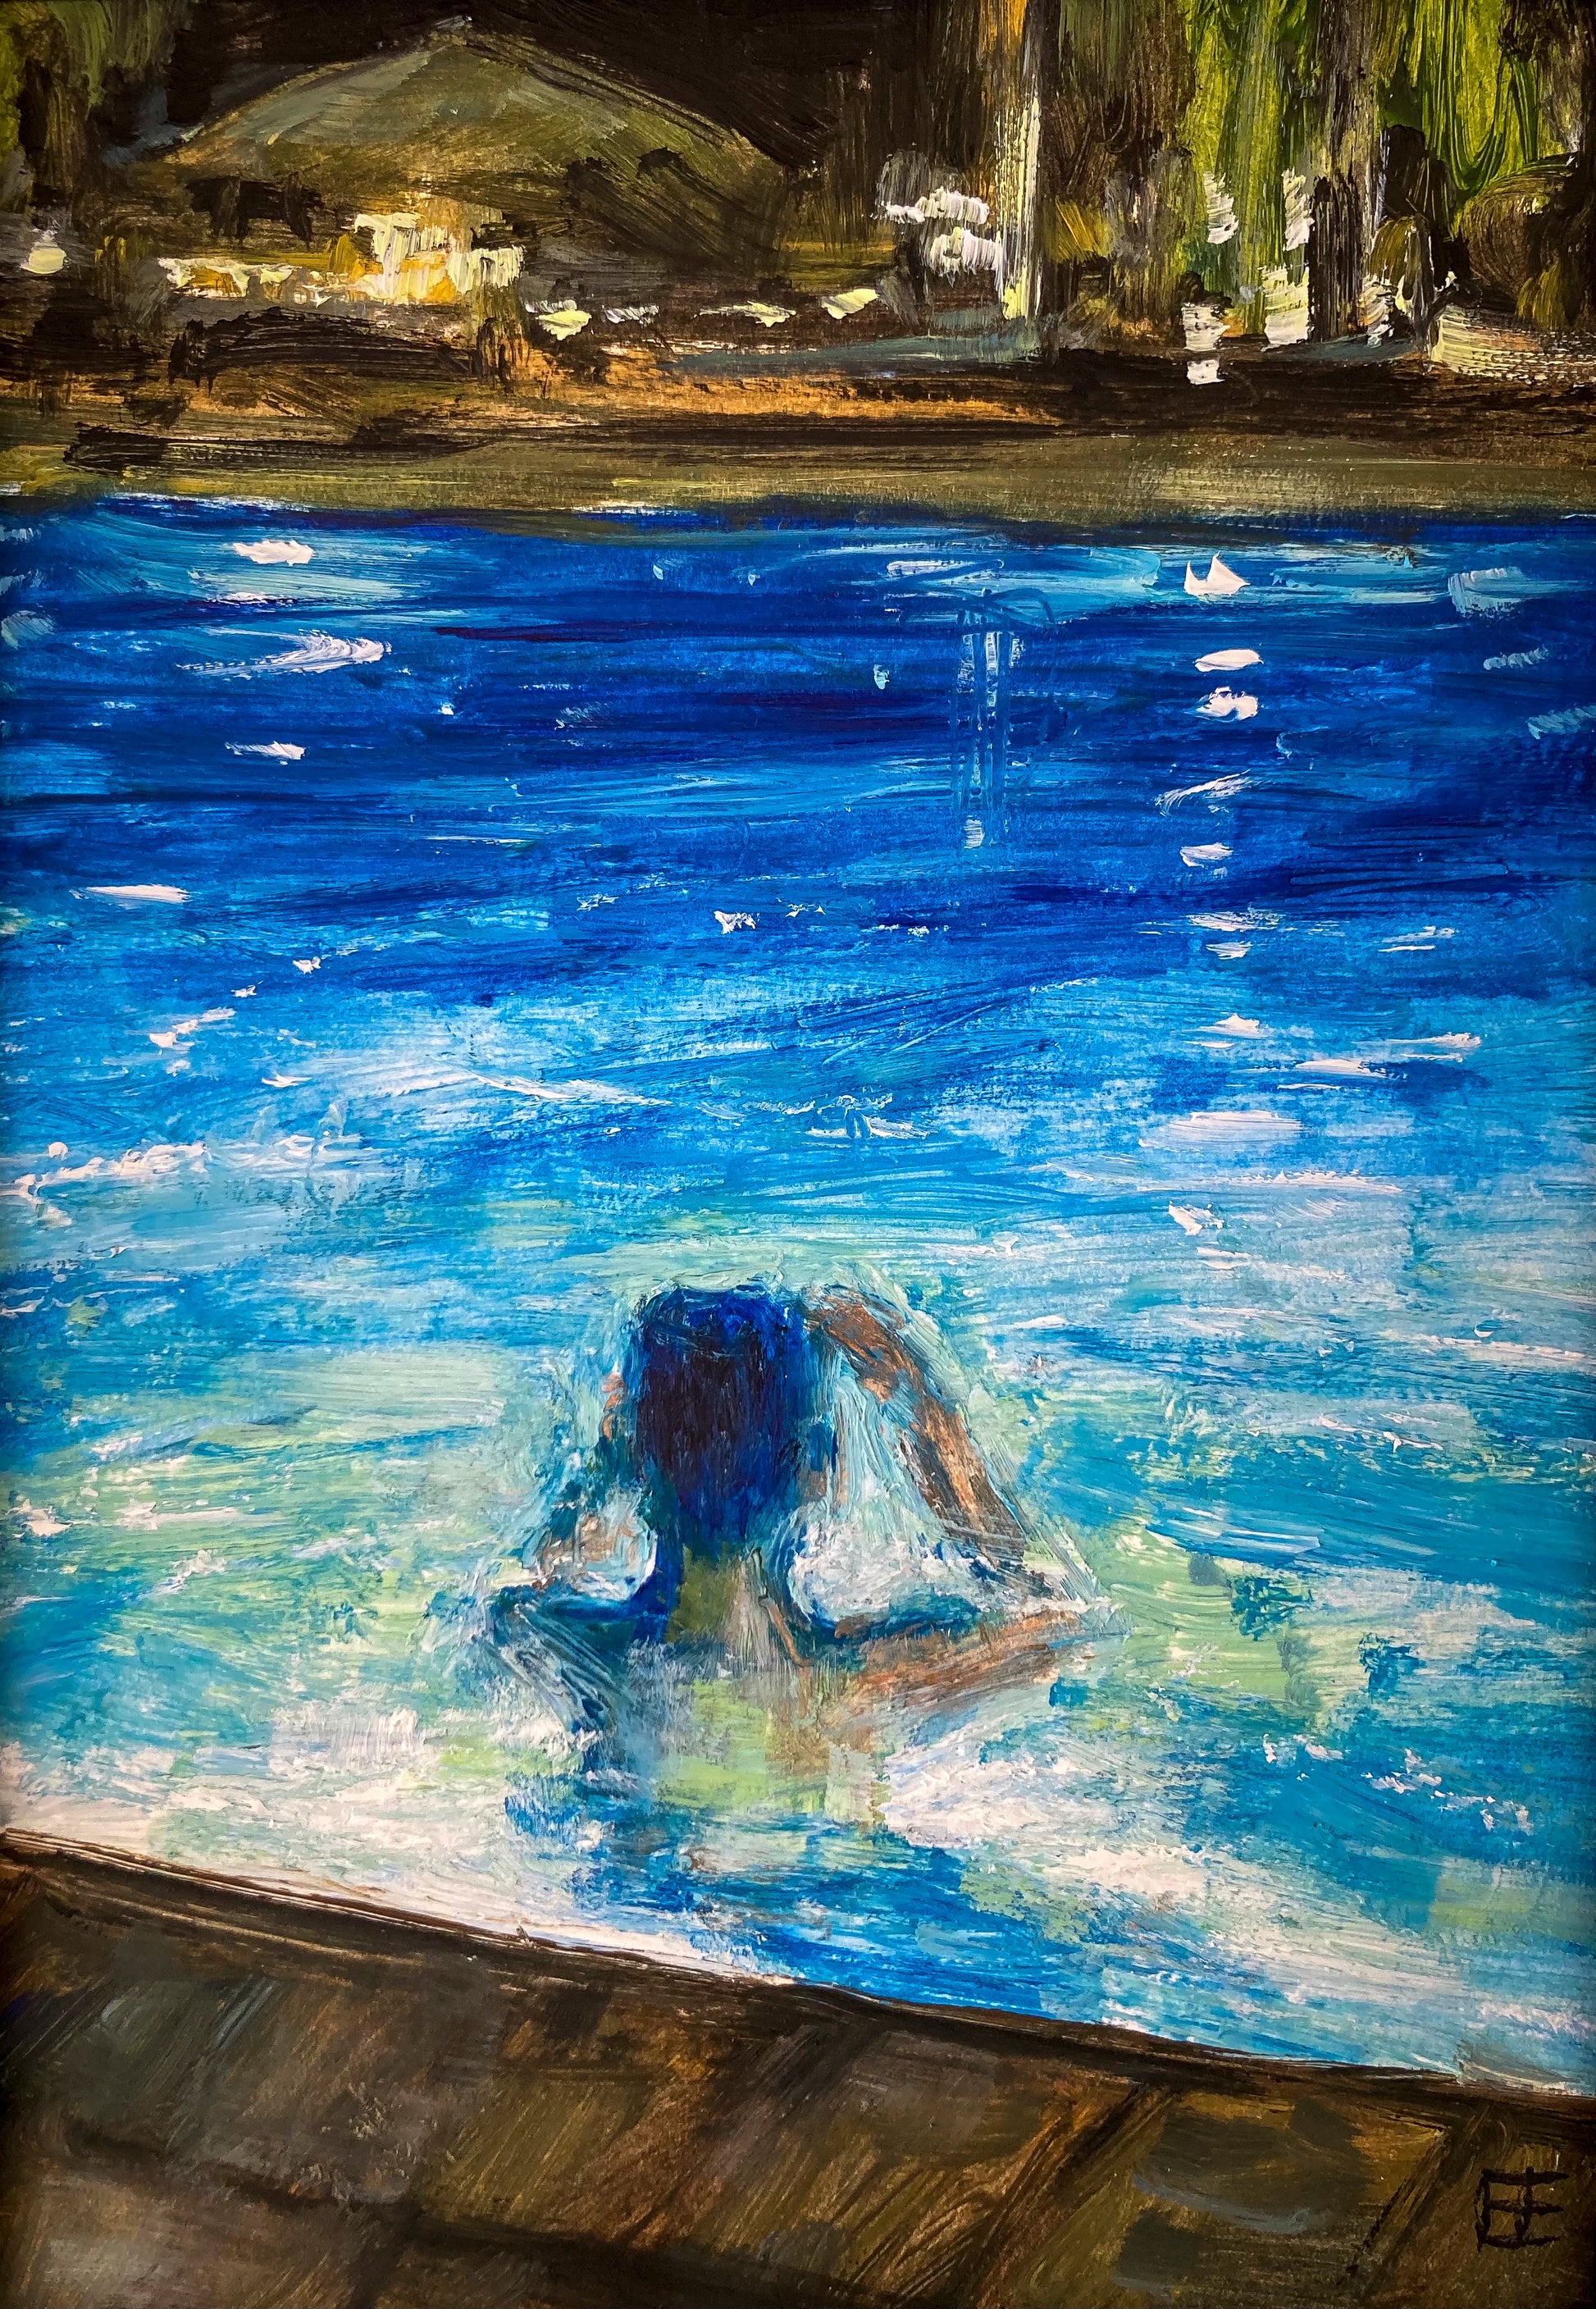 Colorful oil painting on paper; back view of person in pool at night; vibrant blues and impression of lights and umbrella in background; 5"x7" image; artist E.E. Jacks